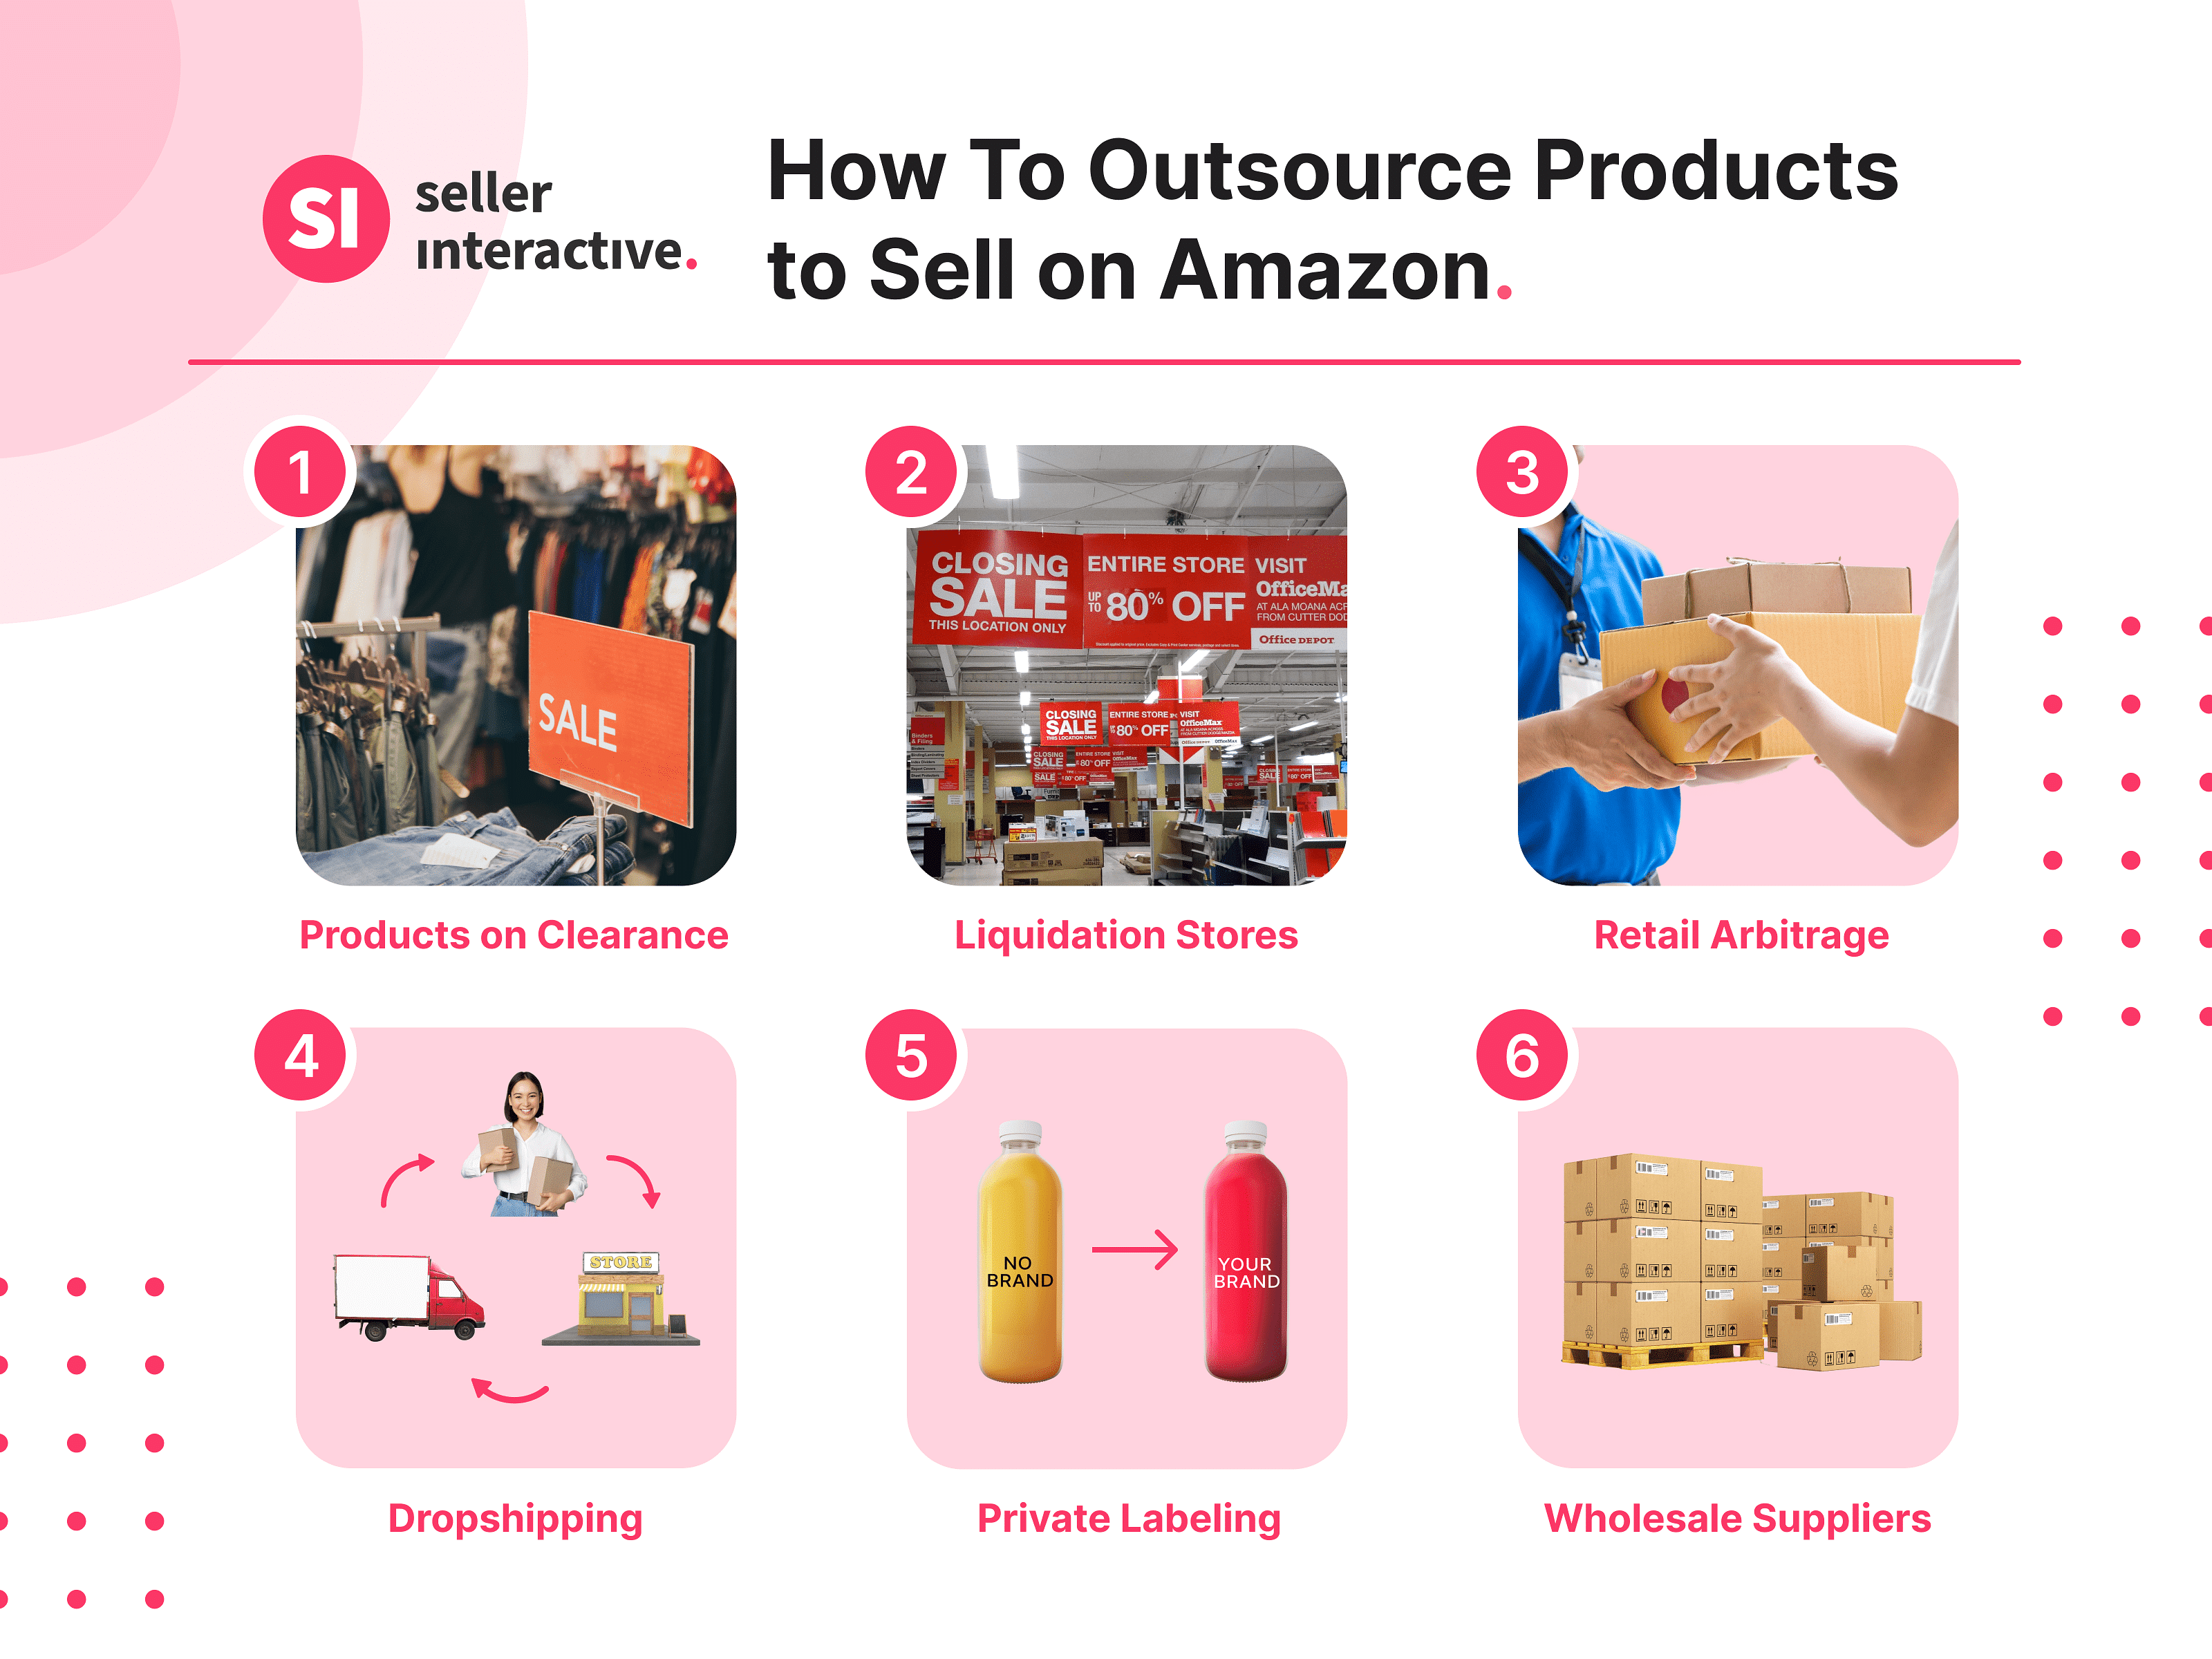 A graphic showing the different ways to outsource products to sell on amazon, from top-left to bottom-right: products on clearance, liquidation stores, retail arbitrage, dropshipping, private labeling, wholesale suppliers